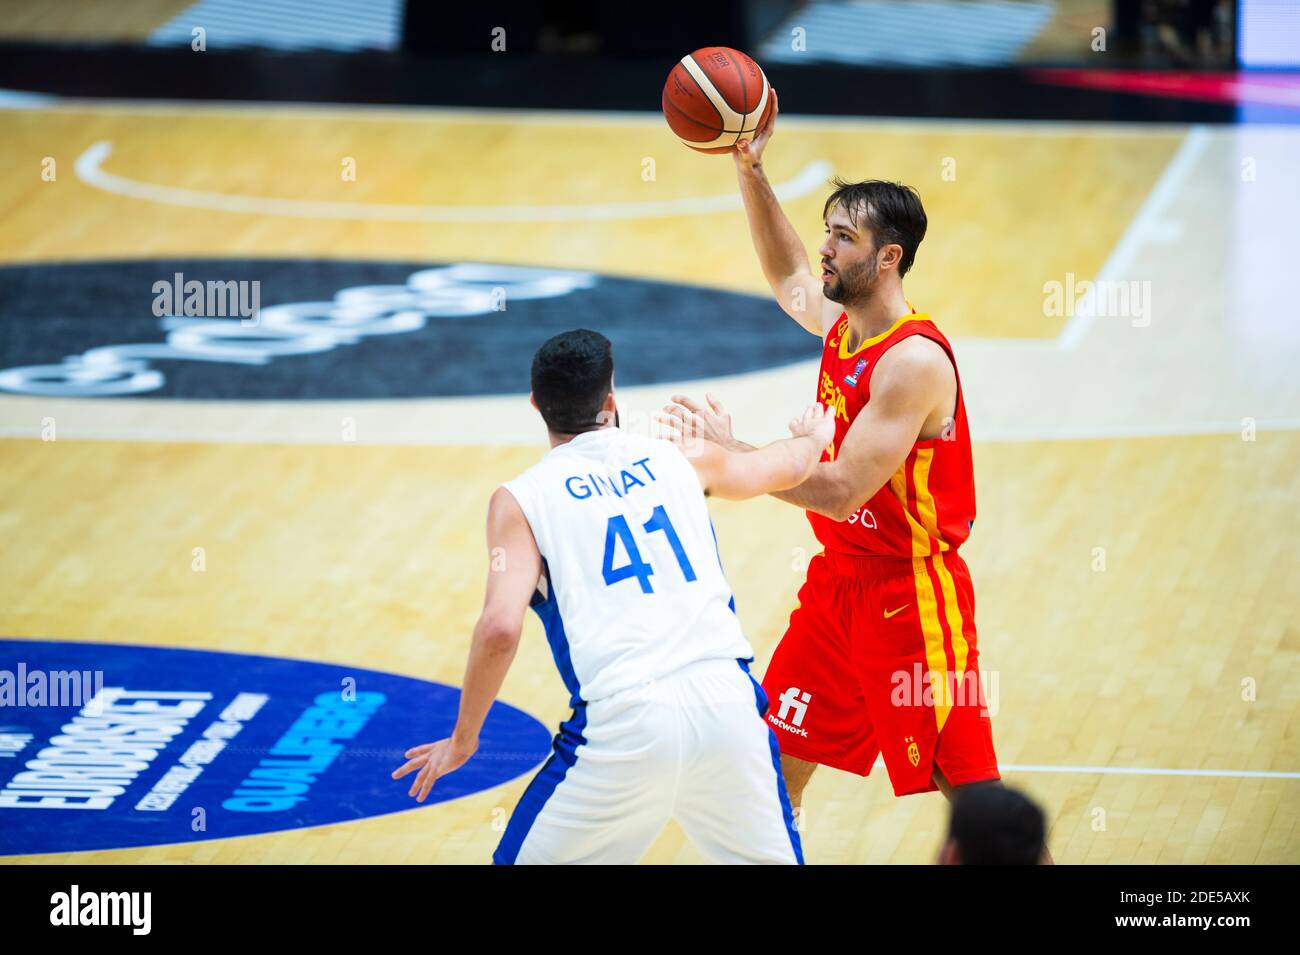 Nacho Llovet of Spain and Tomer Ginat of Israel in action during the FIBA EuroBasket 2022 Qualifiers match between Israel and Spain at Pavelló Municipal Font de San Lluís (Pabellón Fuente de San Luis).Final score; Israel 95:87 Spain. Stock Photo